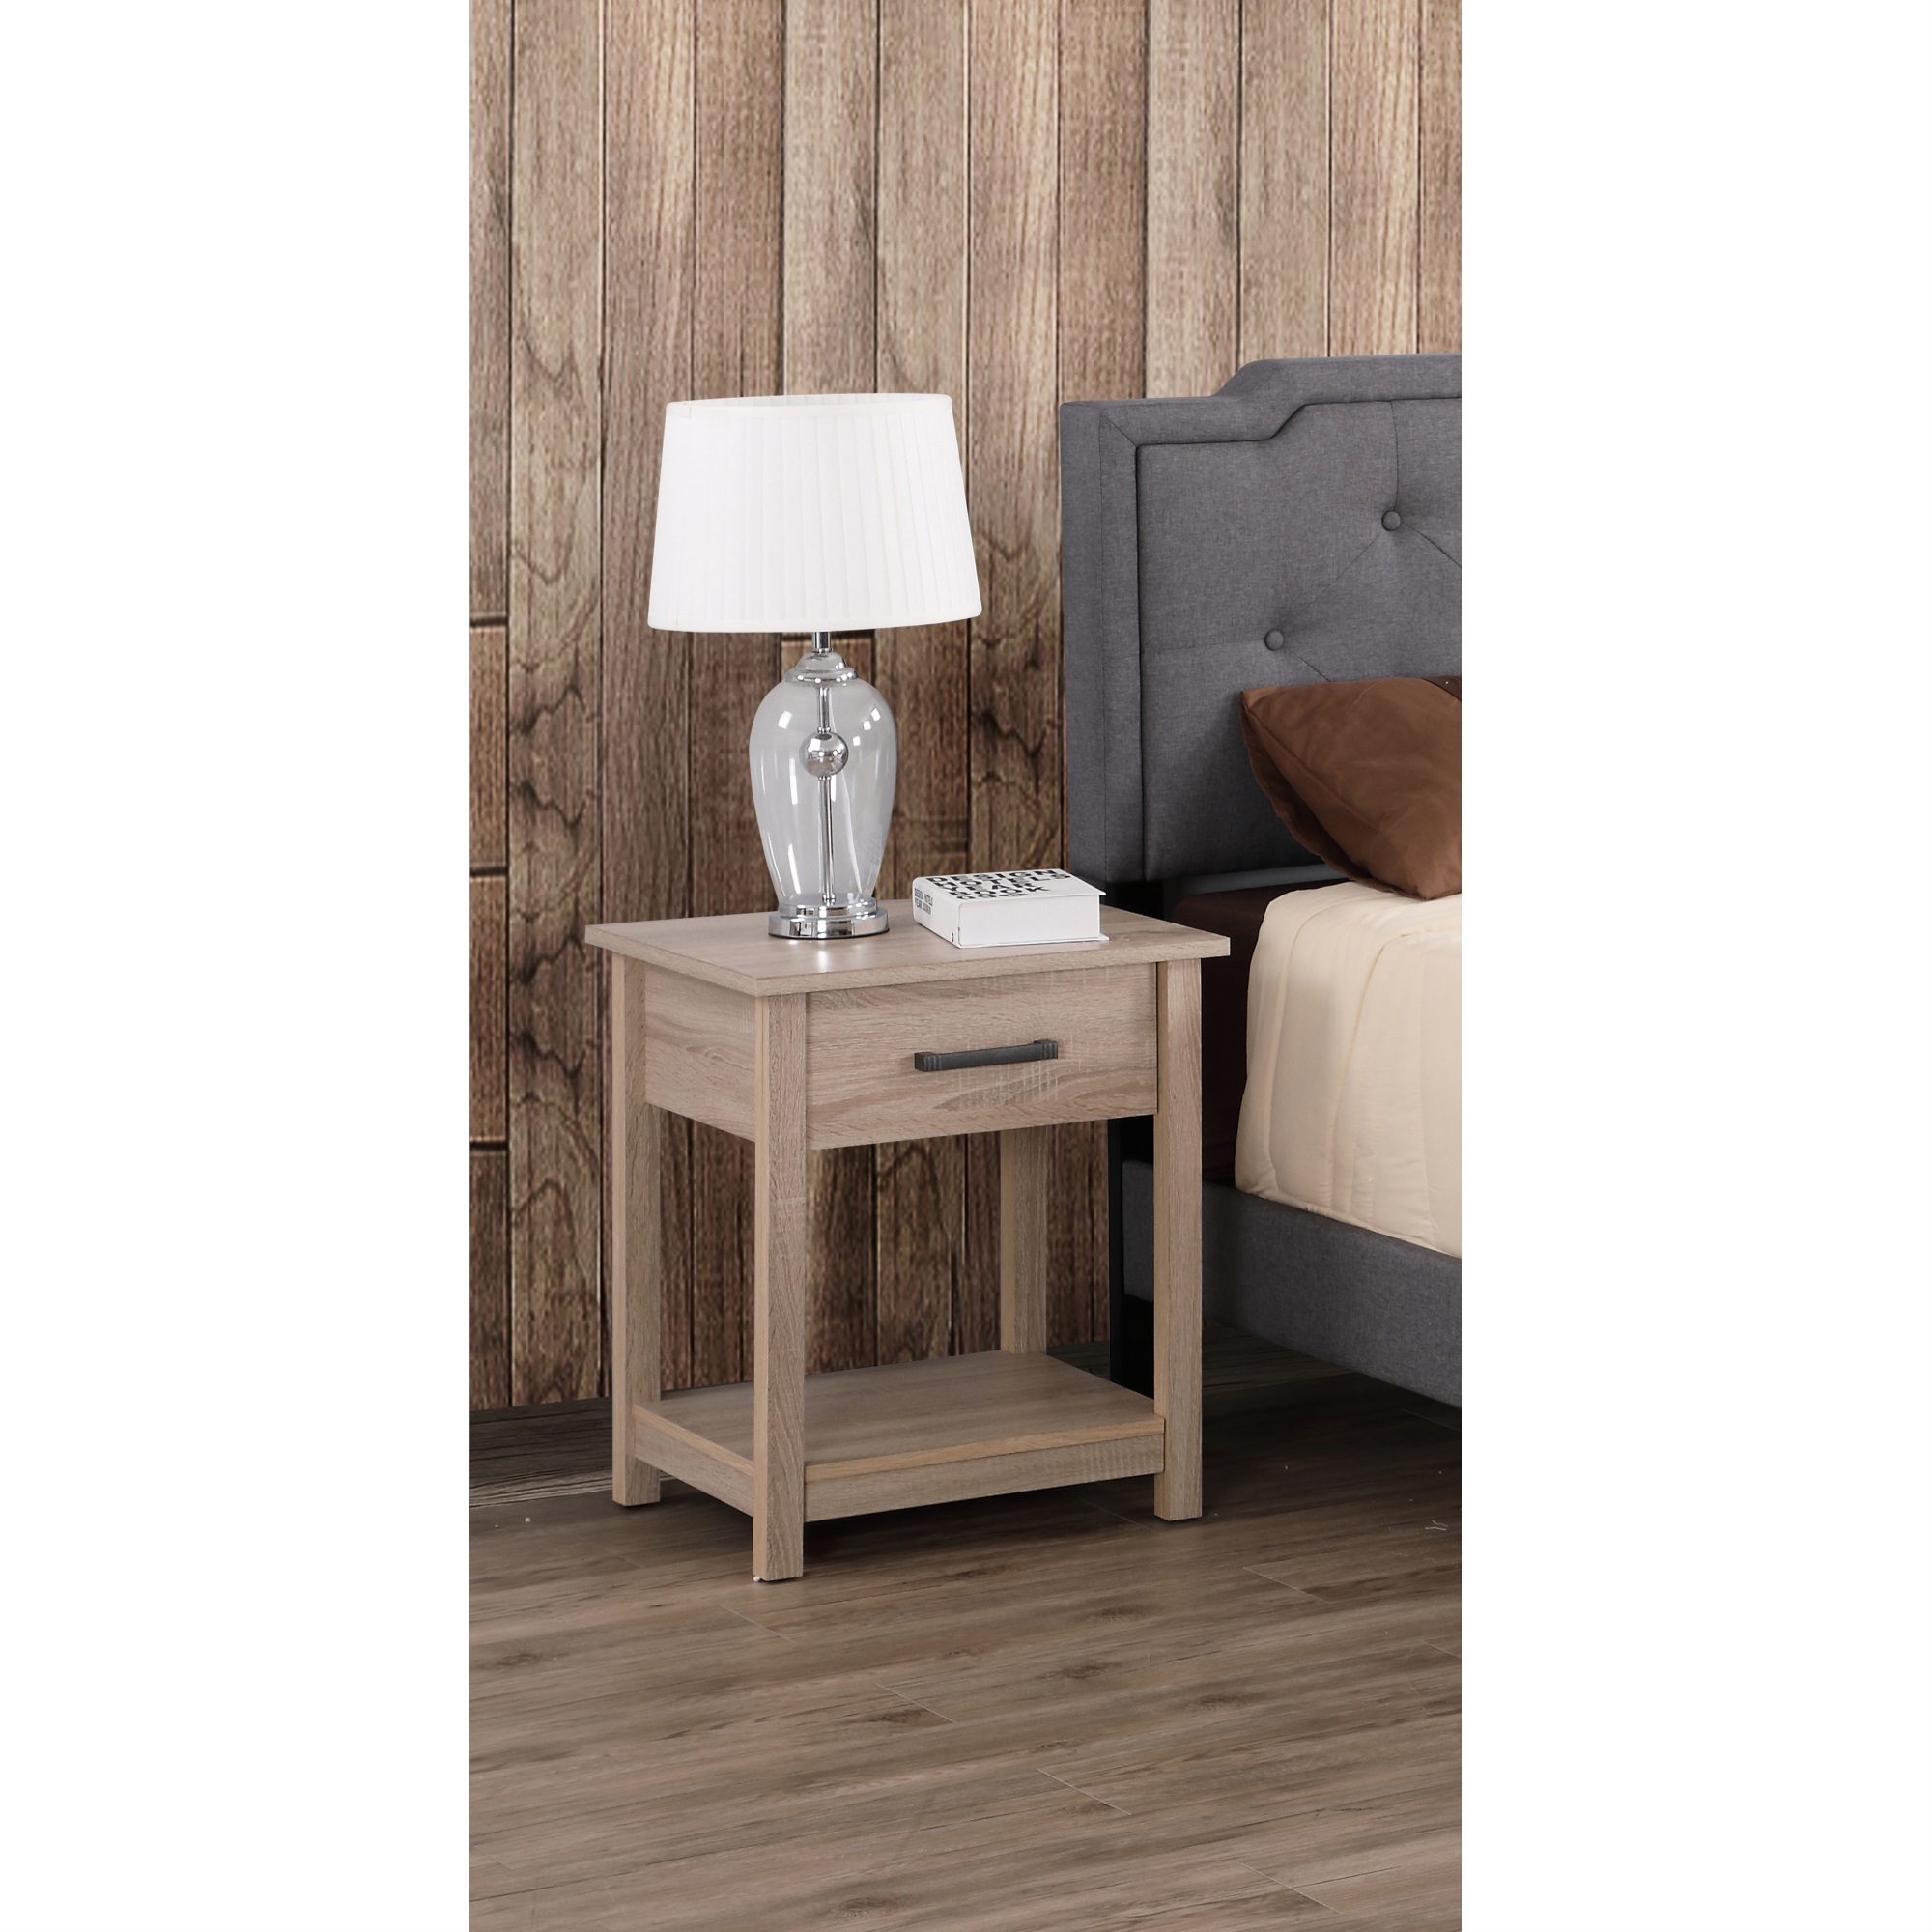 Passion Furniture Salem 1-Drawer Sandle Wood Nightstand (24 in. H x 19 in. W x 20 in. D)